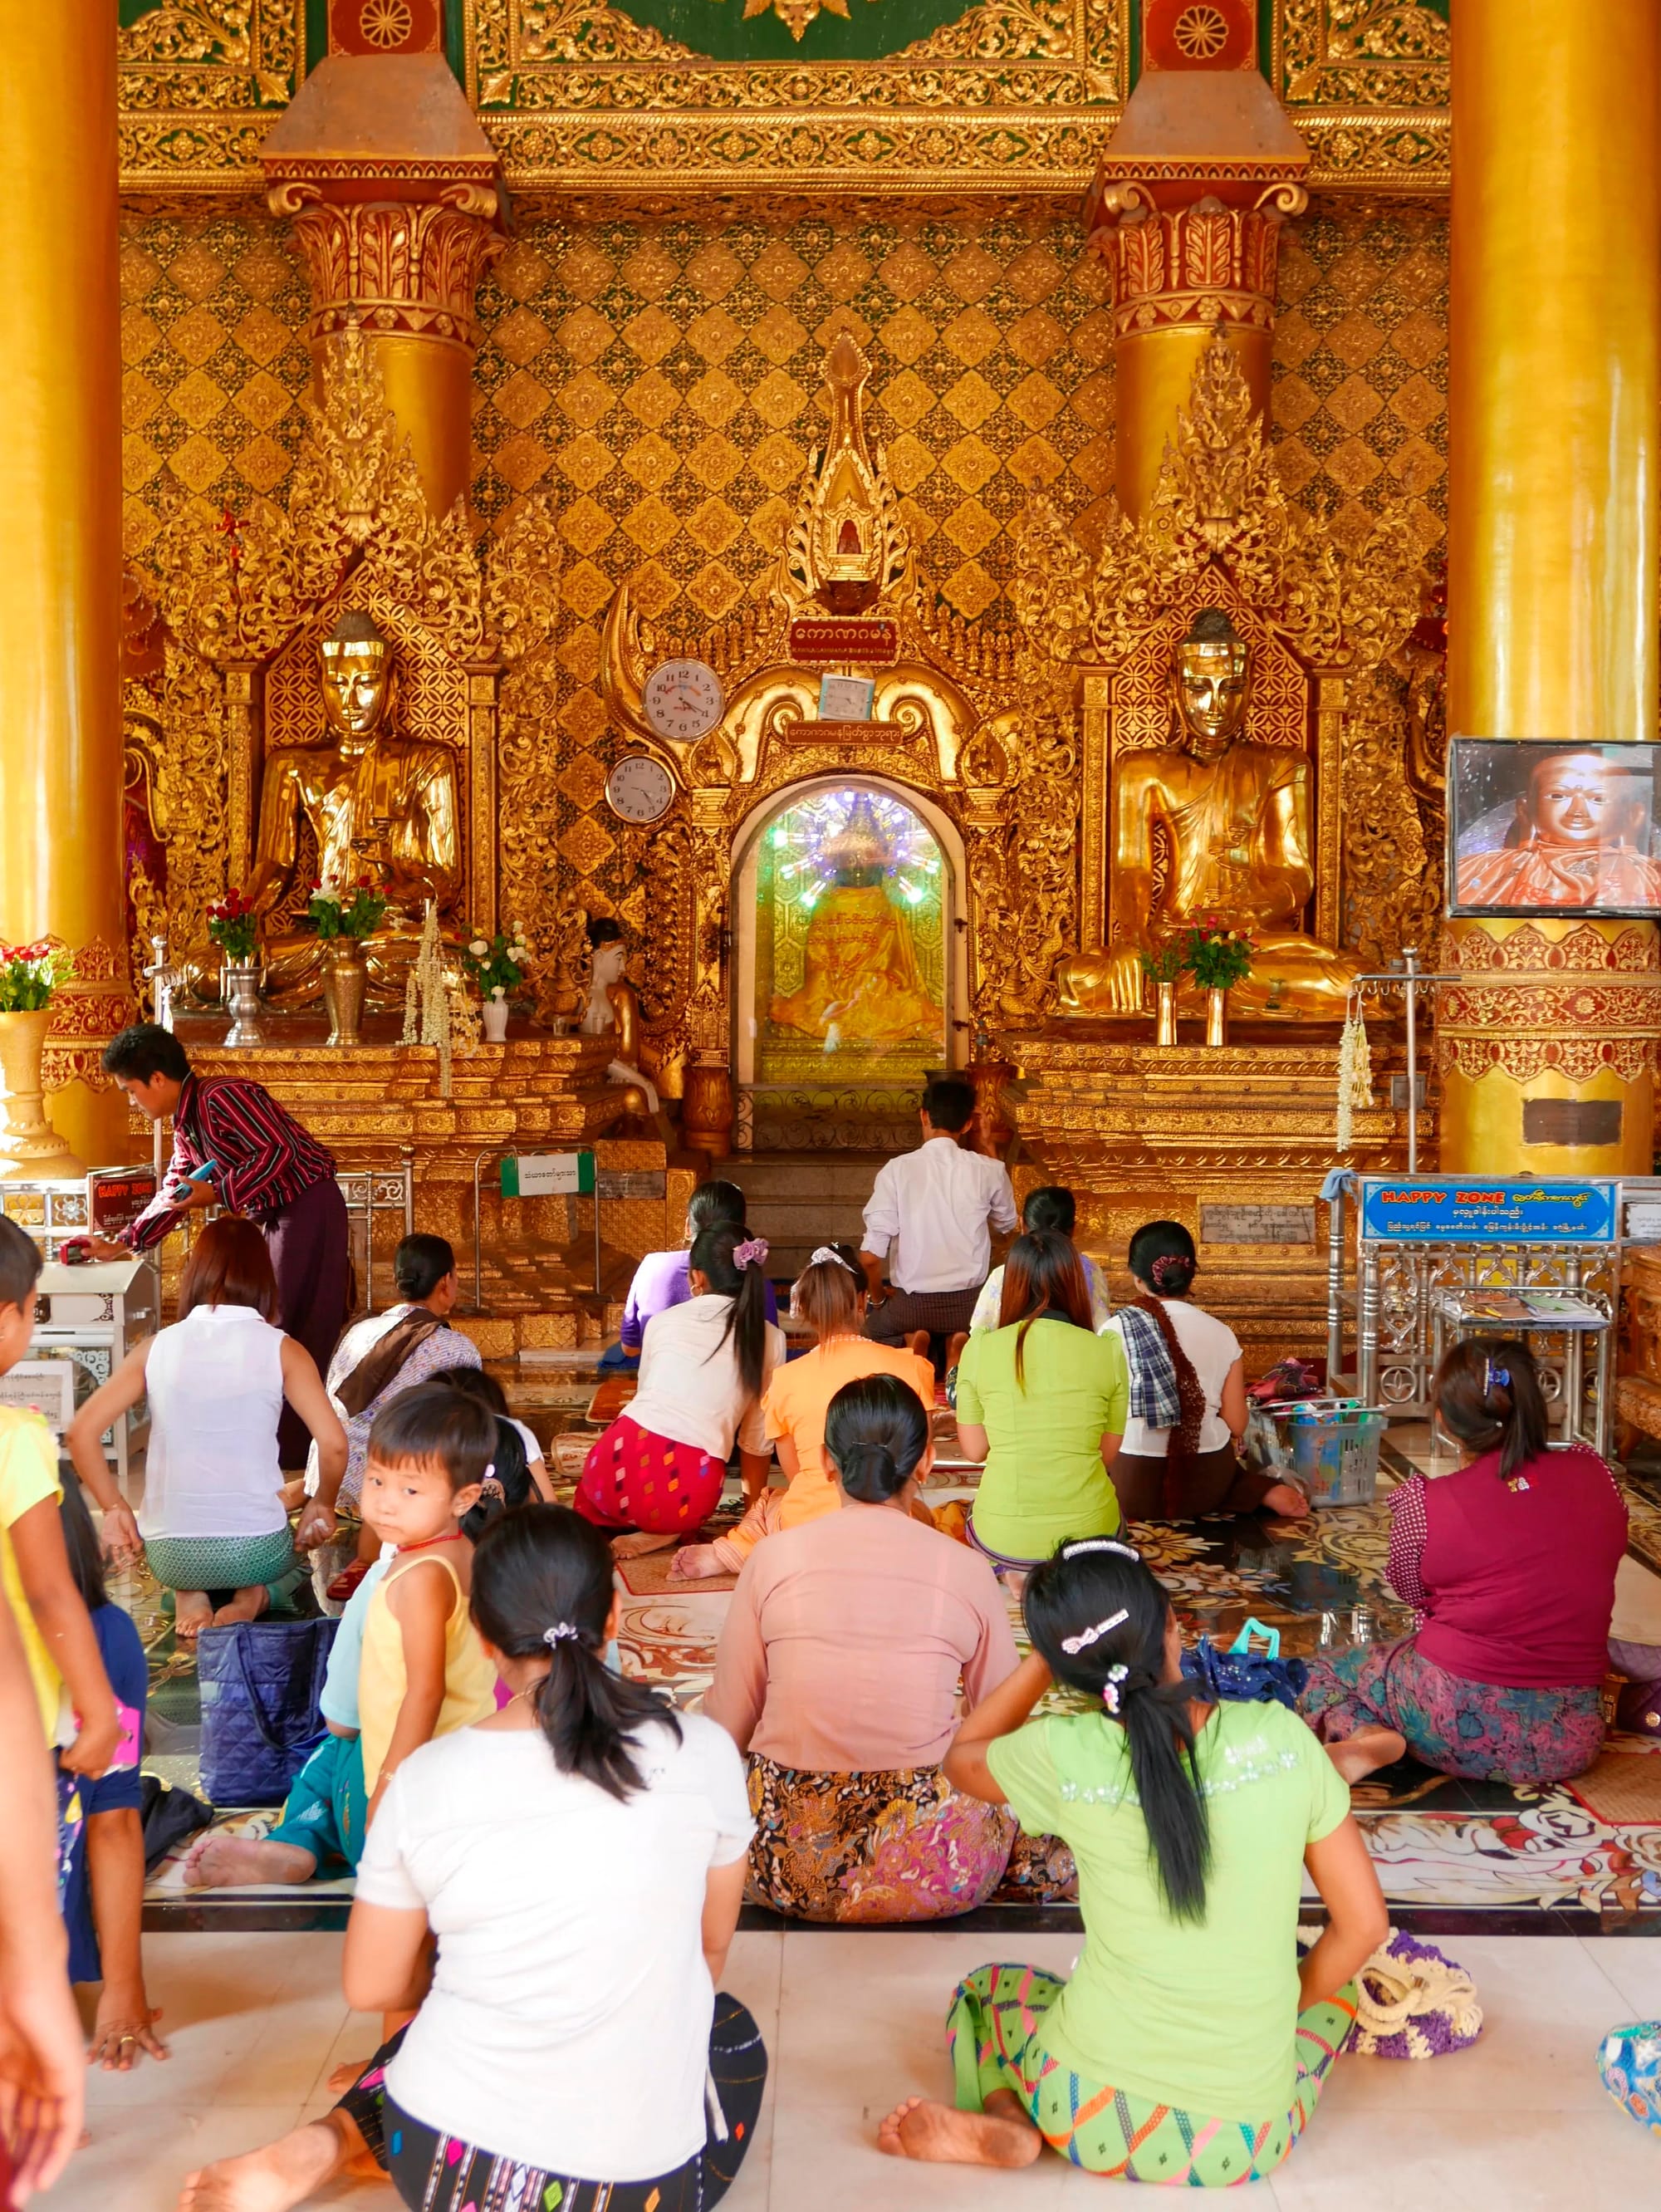 Photo by Author — worshippers at the Shwedagon Pagoda